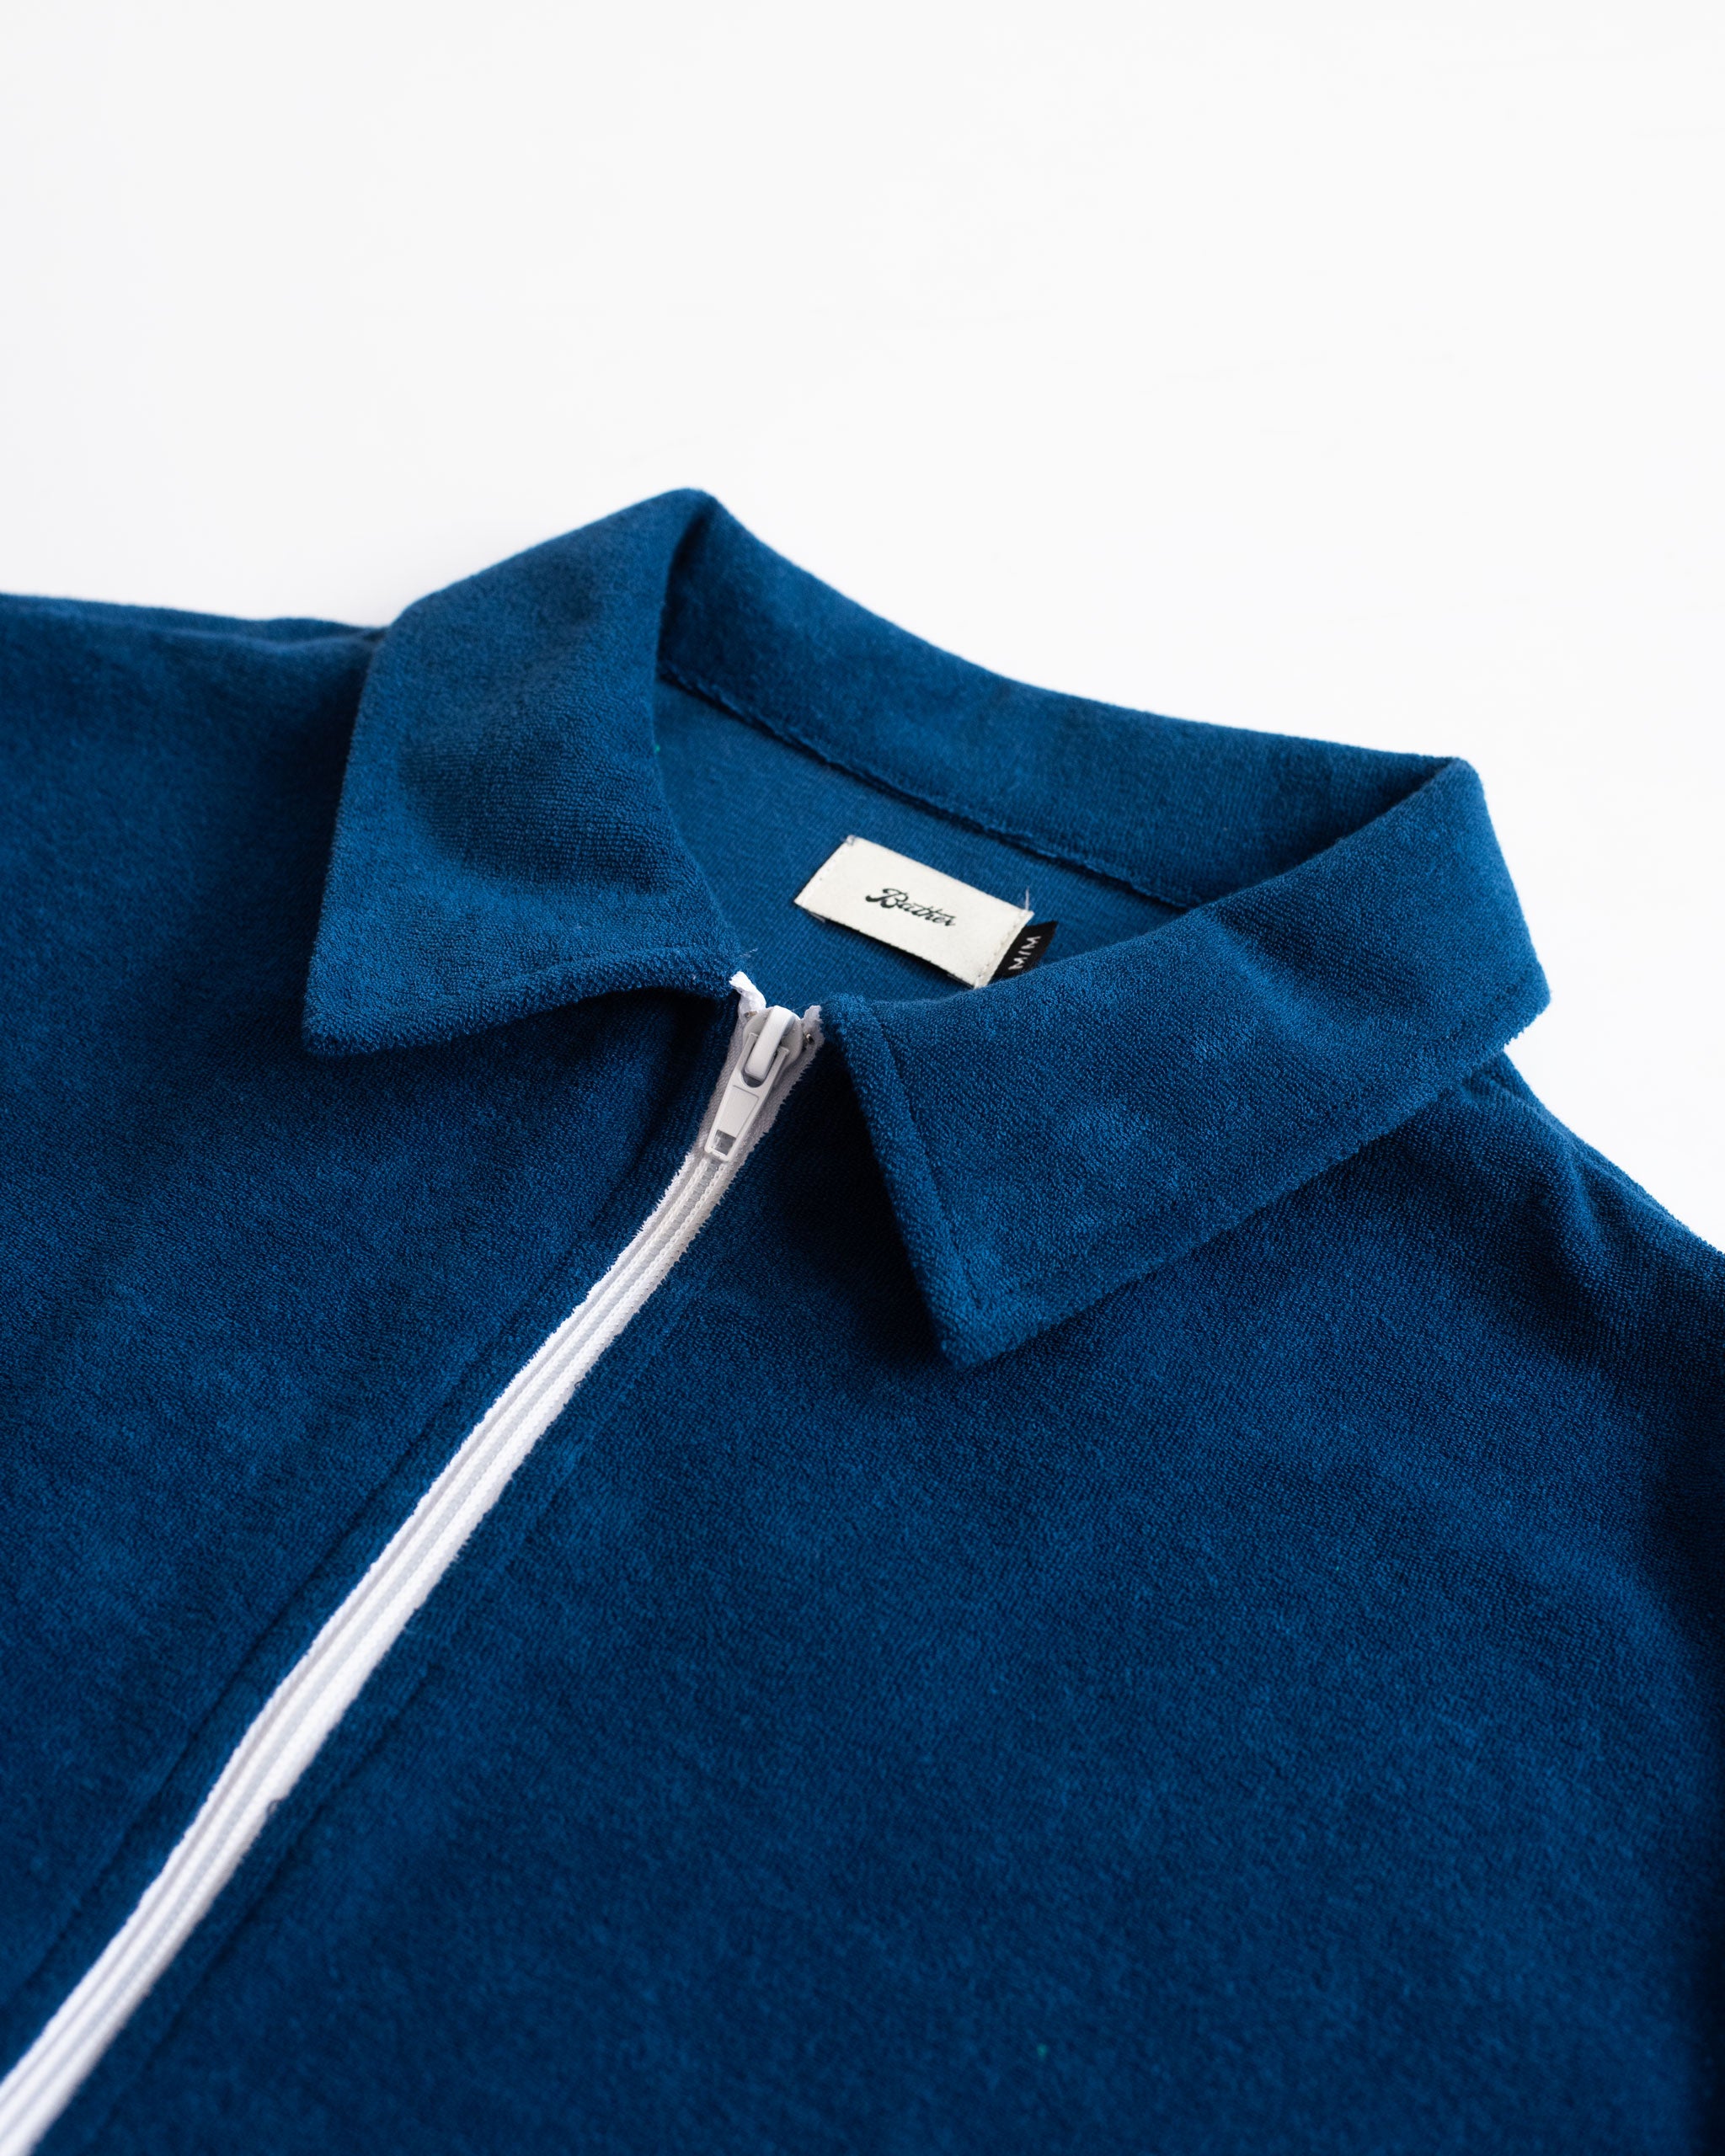 Solid Navy Towel Terry Cotton Full Zip Polo Shirt collar close up